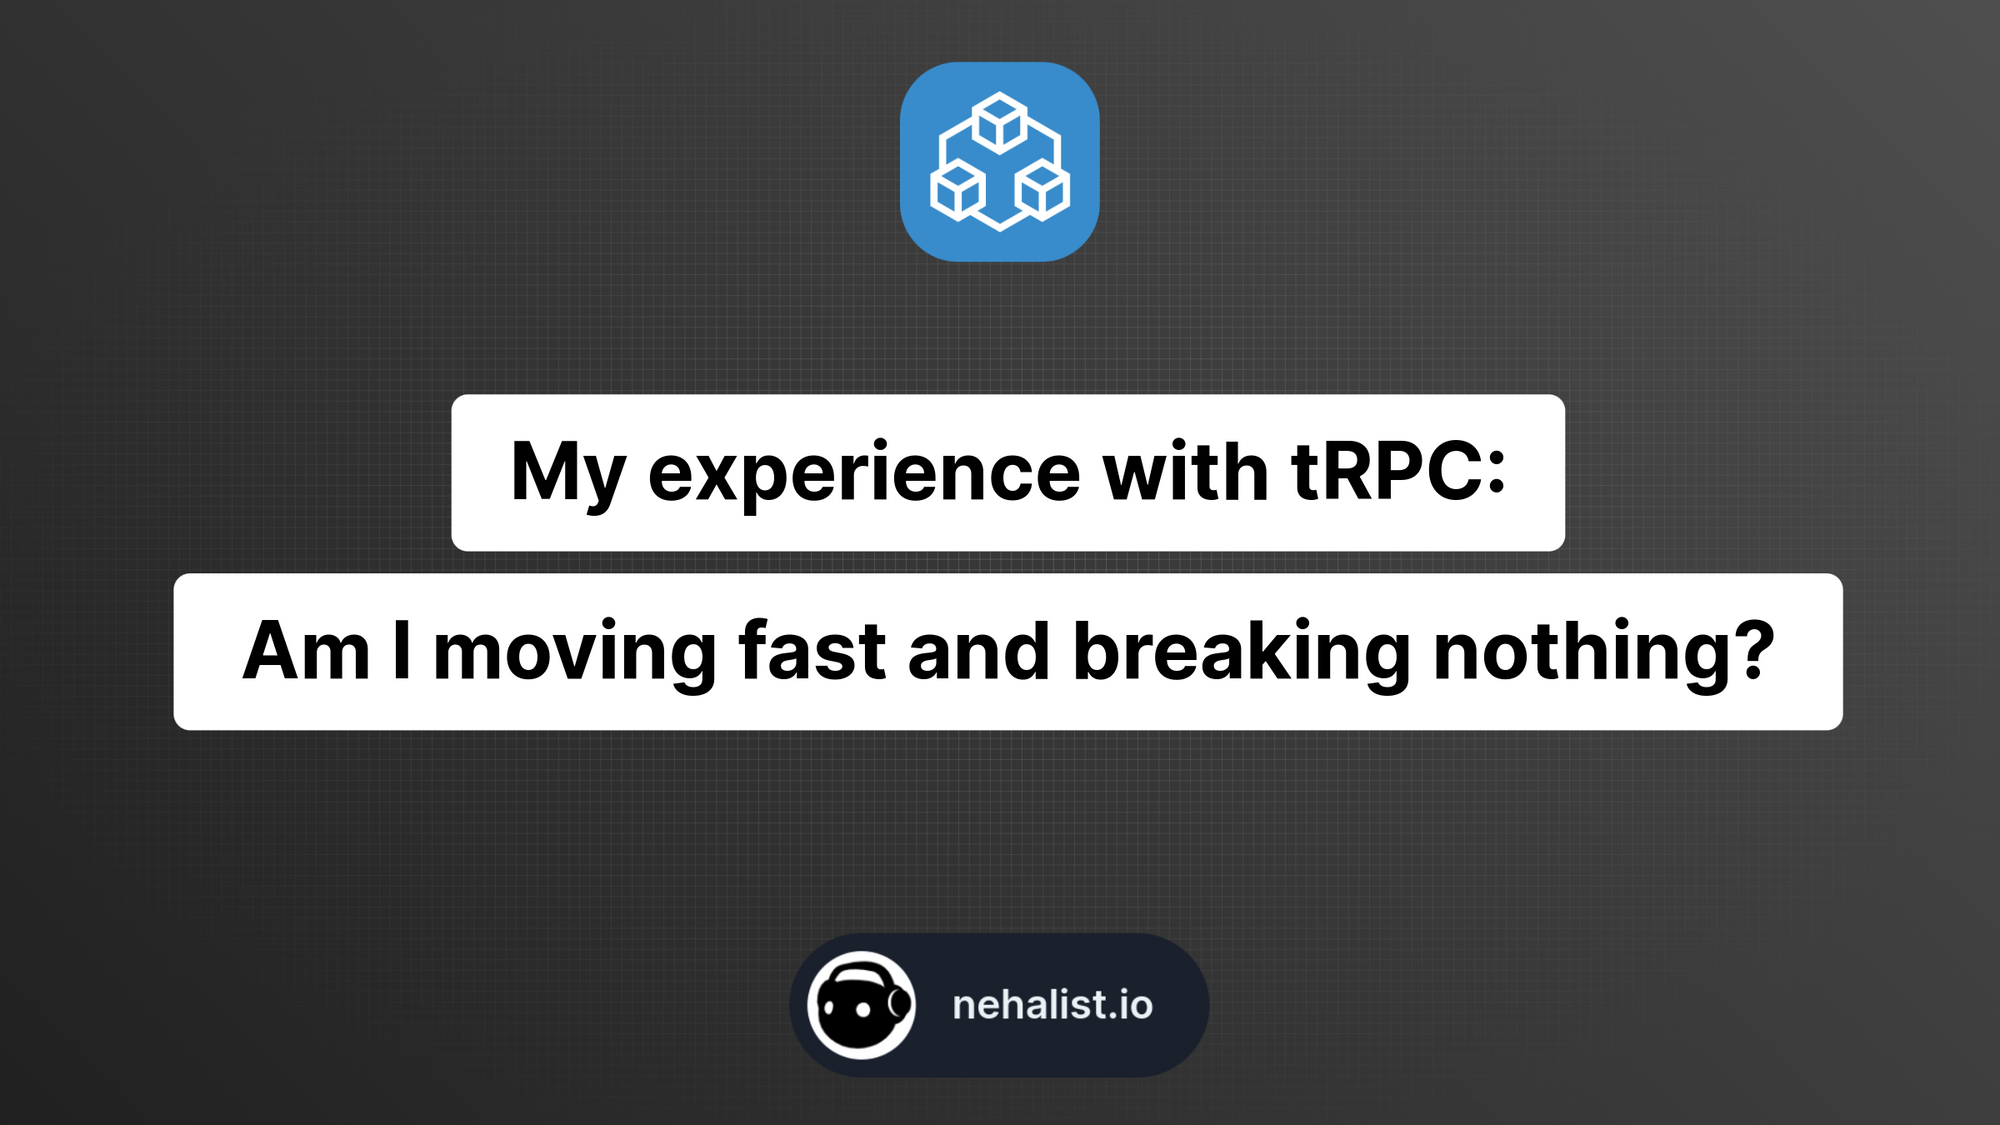 My experience with tRPC - am I moving fast and breaking nothing?